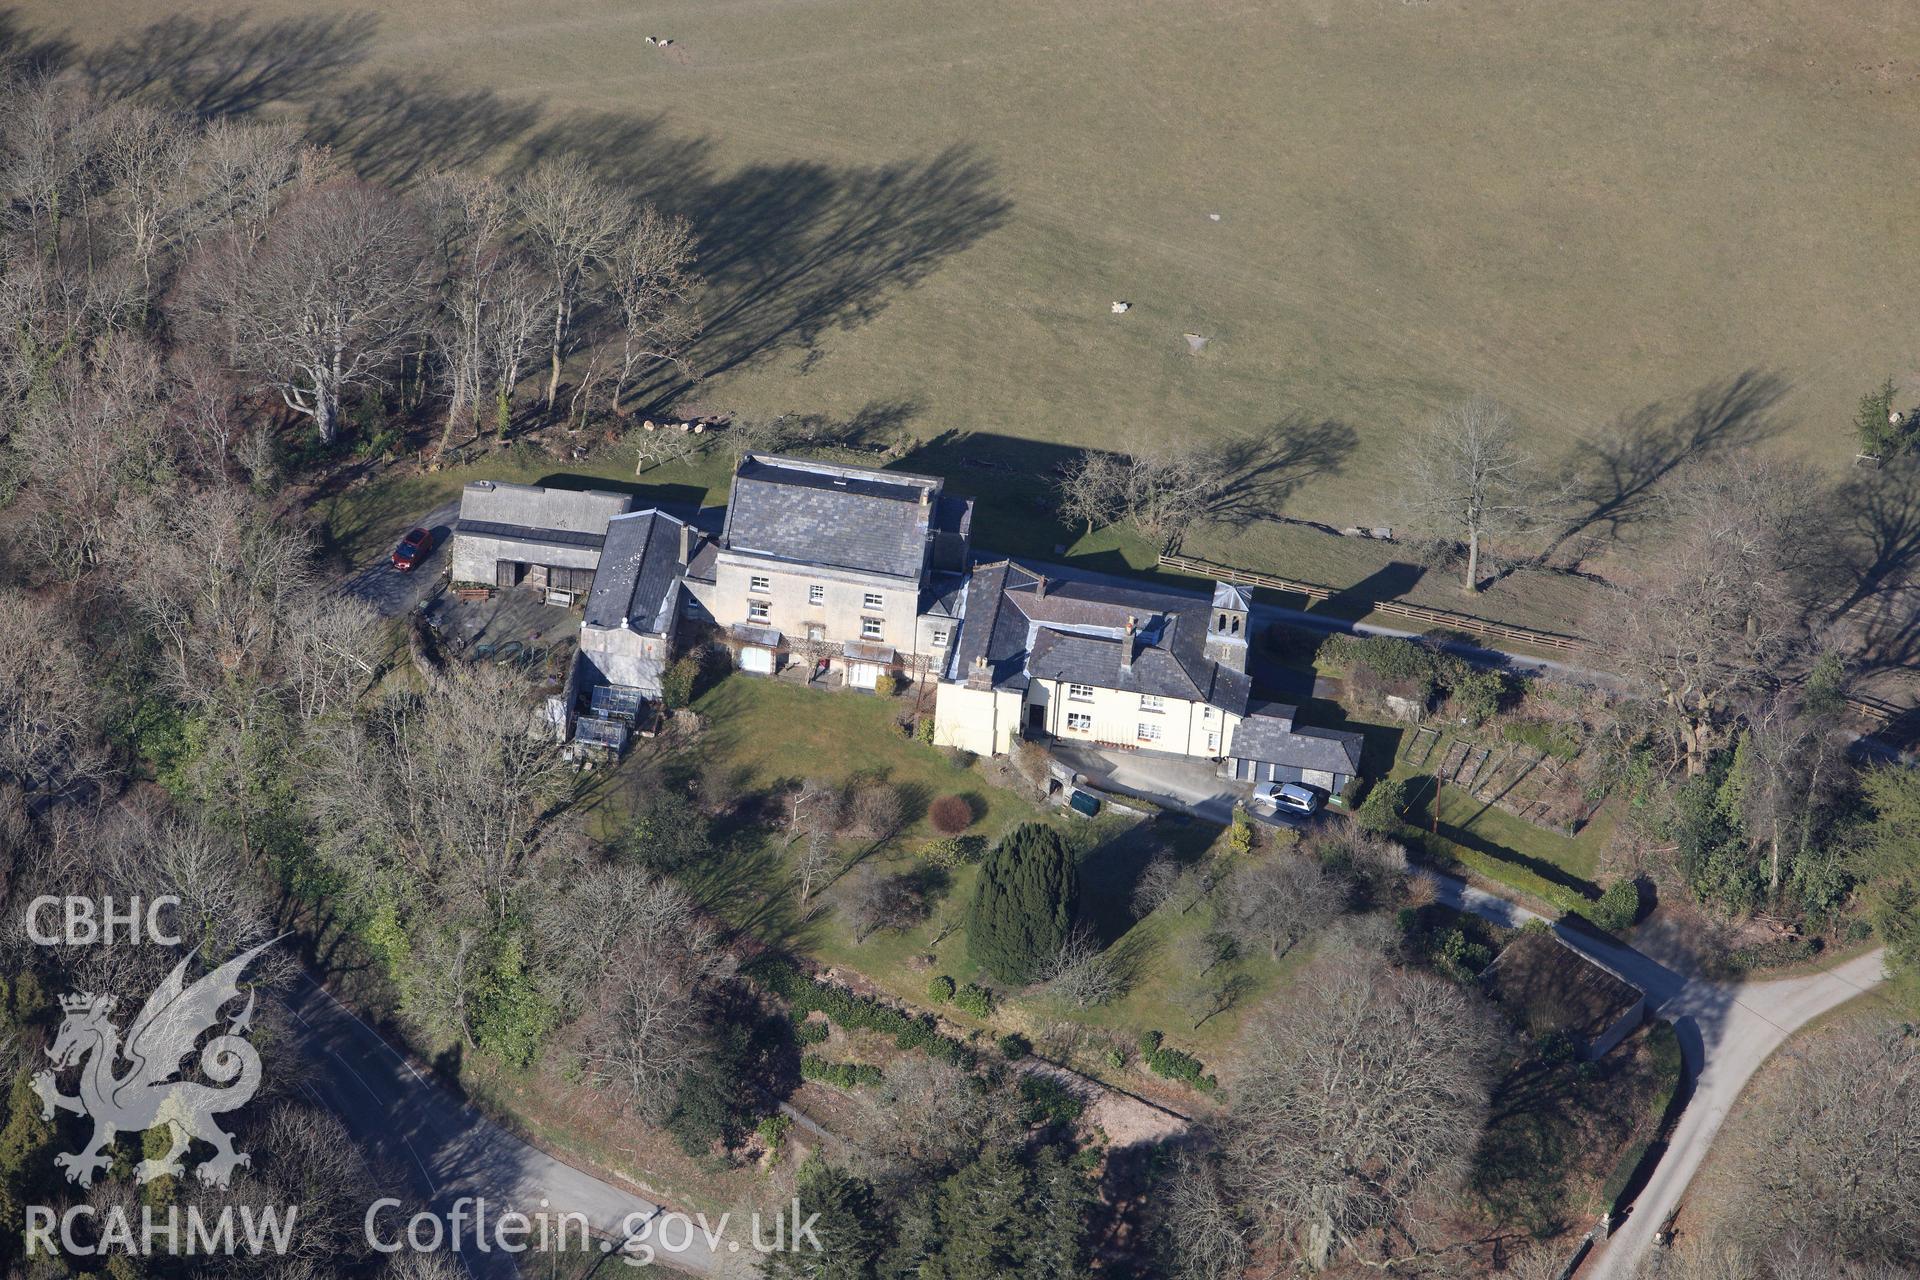 Castle Hill country house and garden, Llanilar, south east of Aberystwyth. Oblique aerial photograph taken during the Royal Commission?s programme of archaeological aerial reconnaissance by Toby Driver on 2nd April 2015.